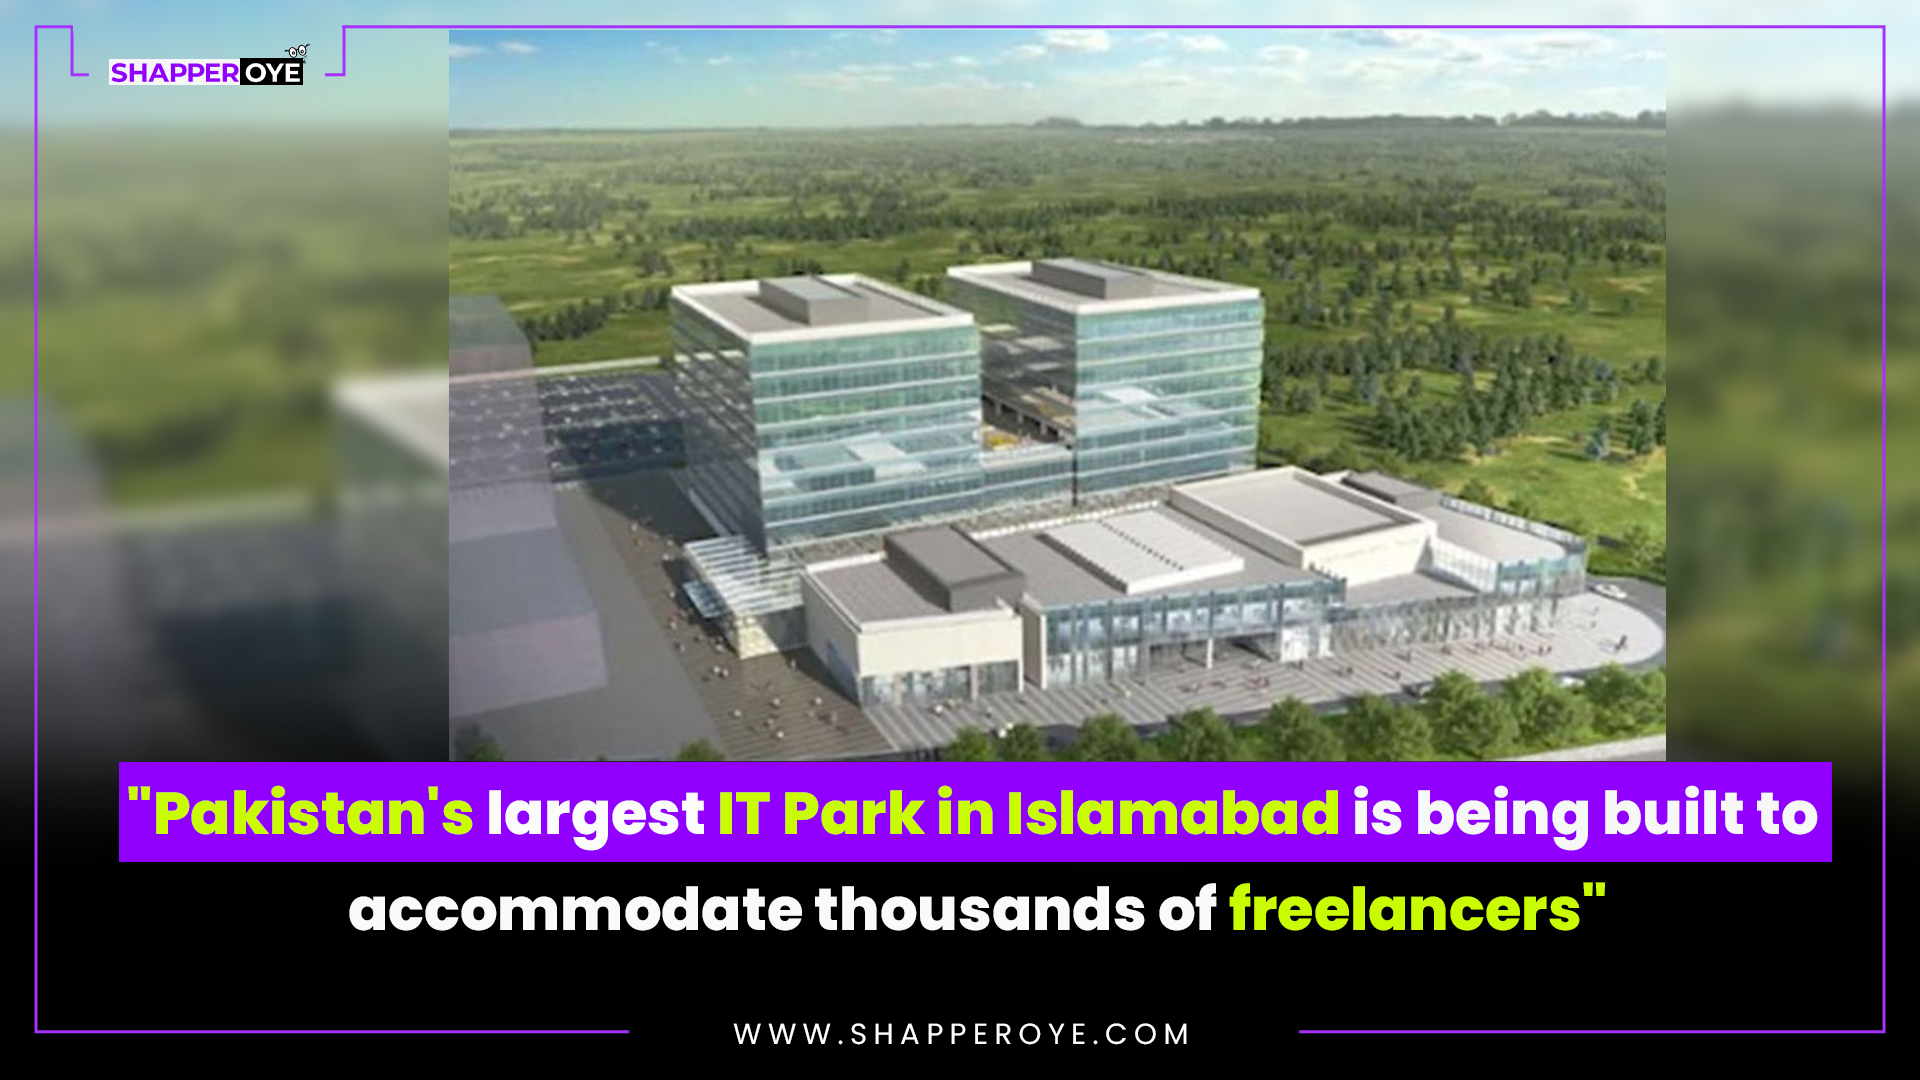 "Pakistan's largest IT Park in Islamabad is being built to accommodate thousands of freelancers"